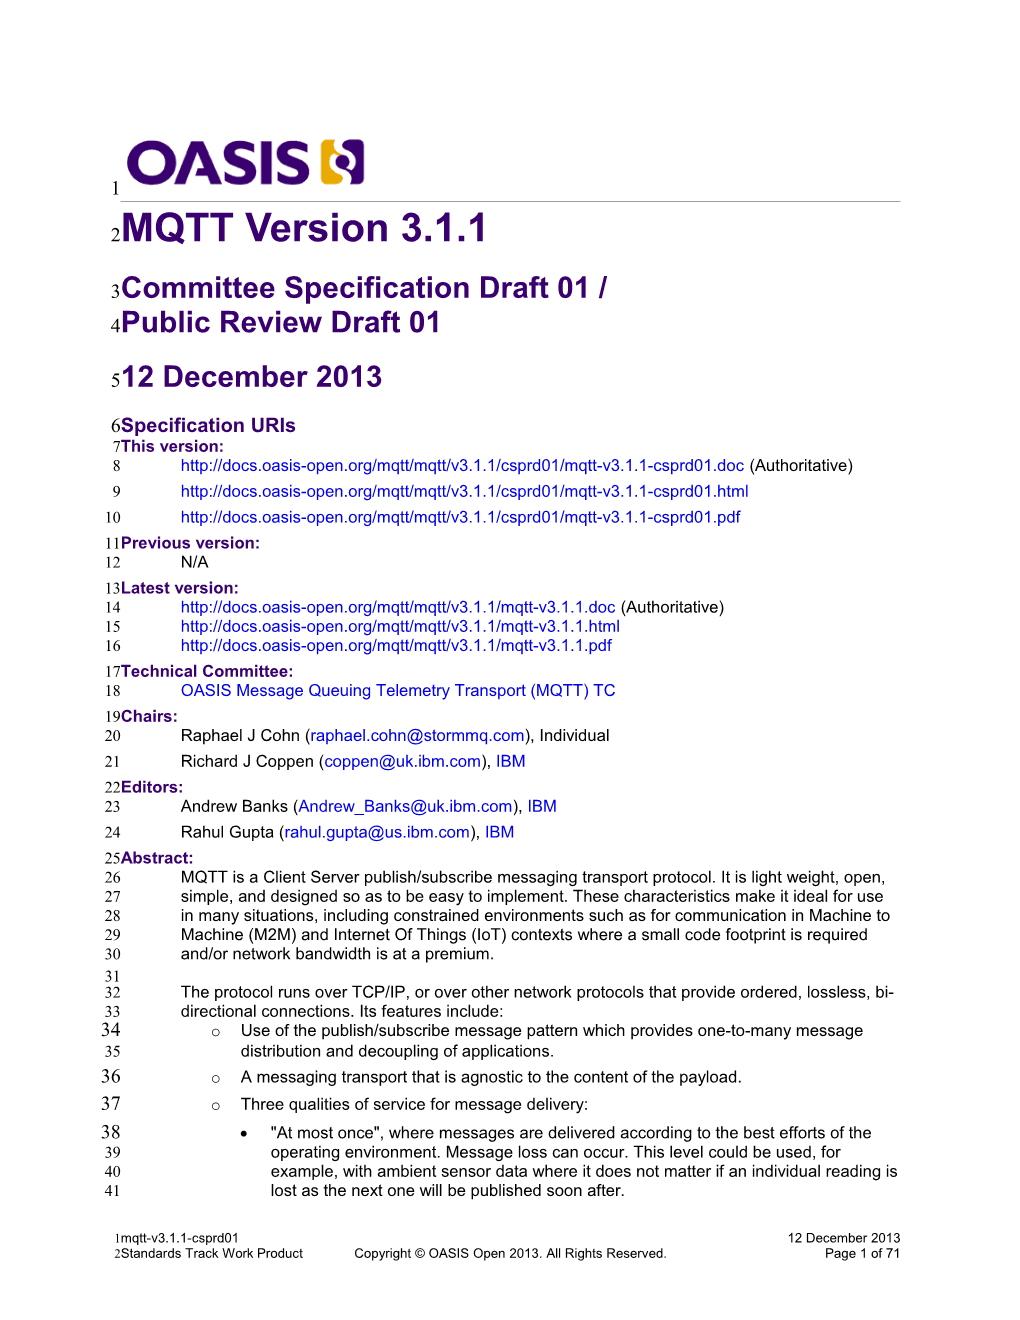 Committee Specification Draft 01 / Public Review Draft 01